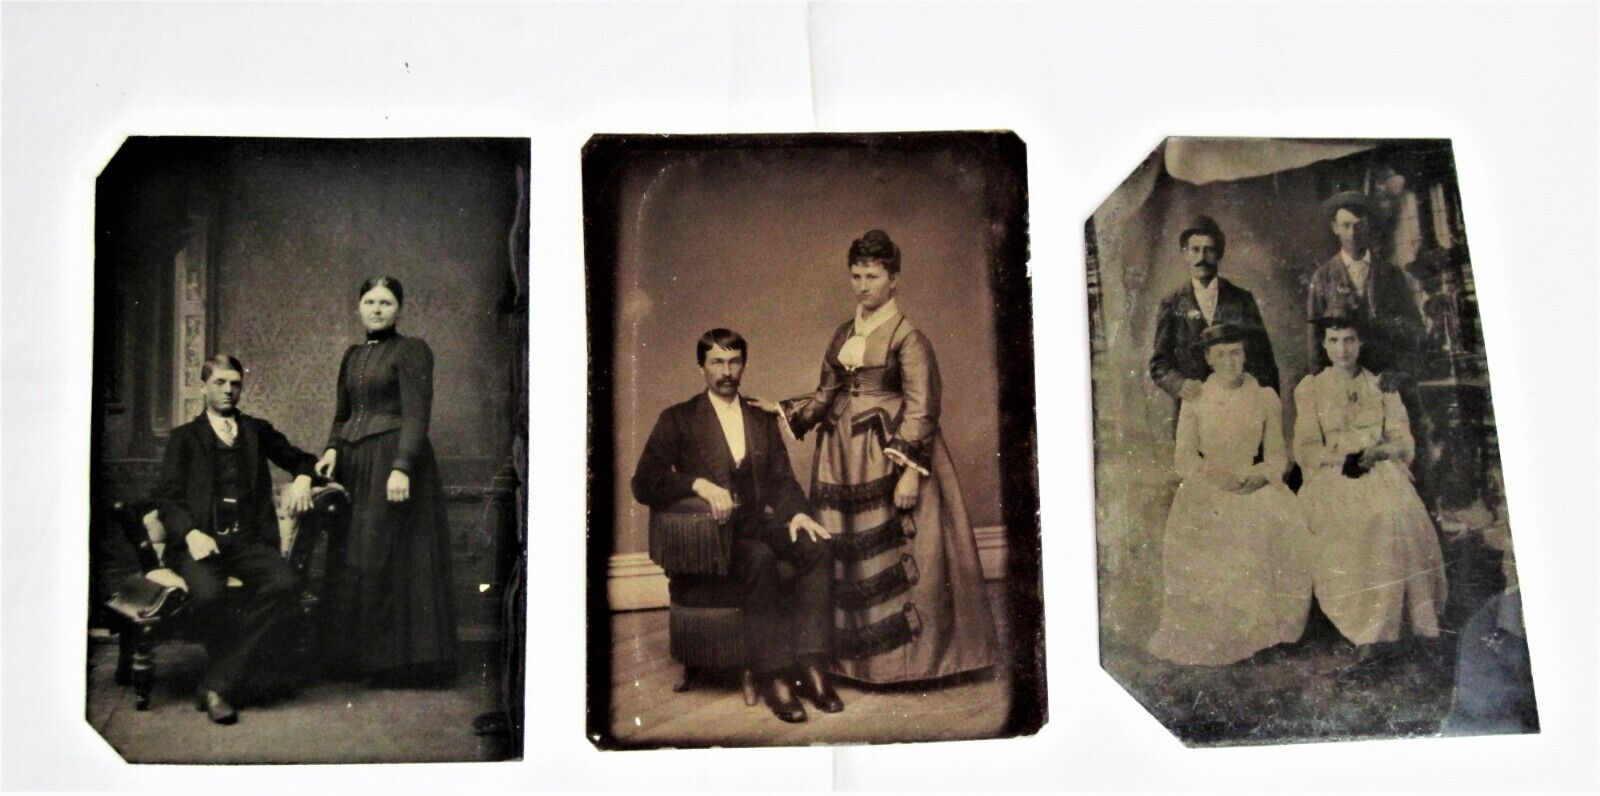 Lot of 3 Antique Tintypes of Couples - 1800's